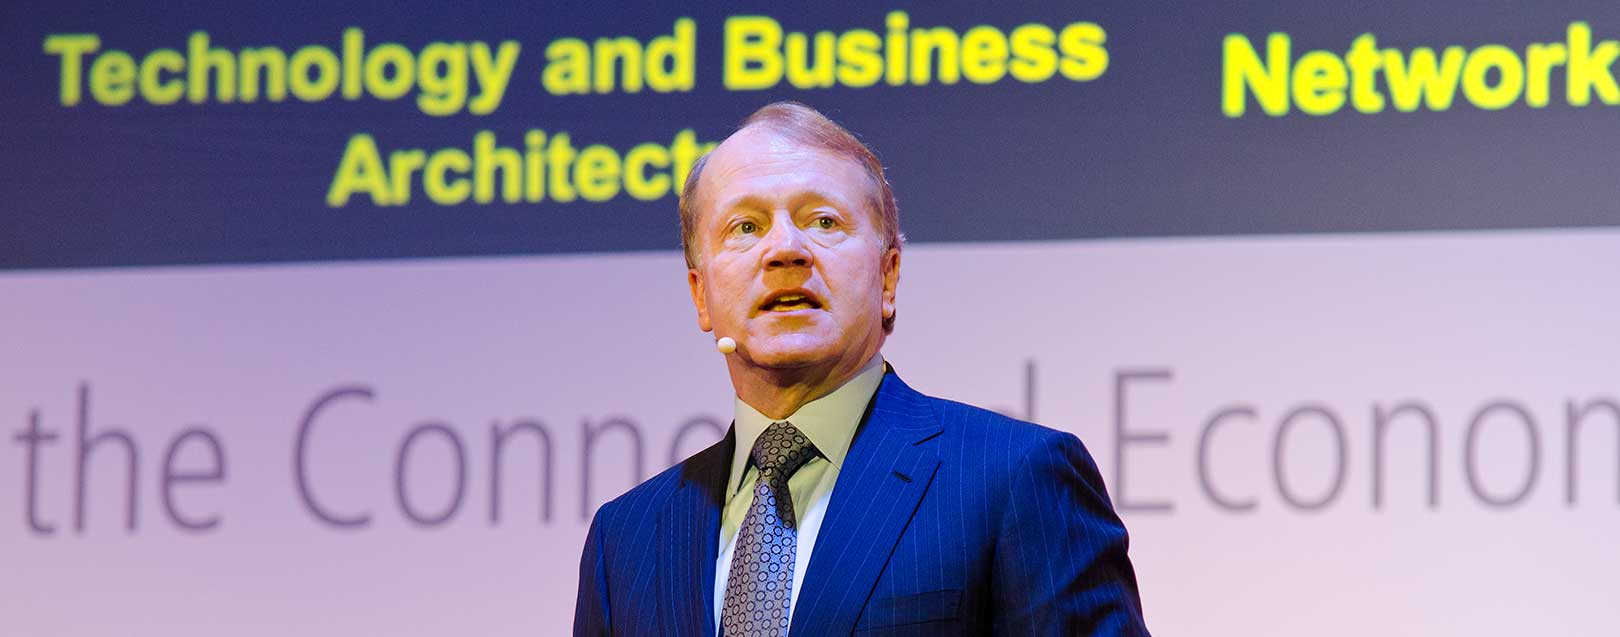 India will turn out to be a role model for the world economies, Cisco Chairman